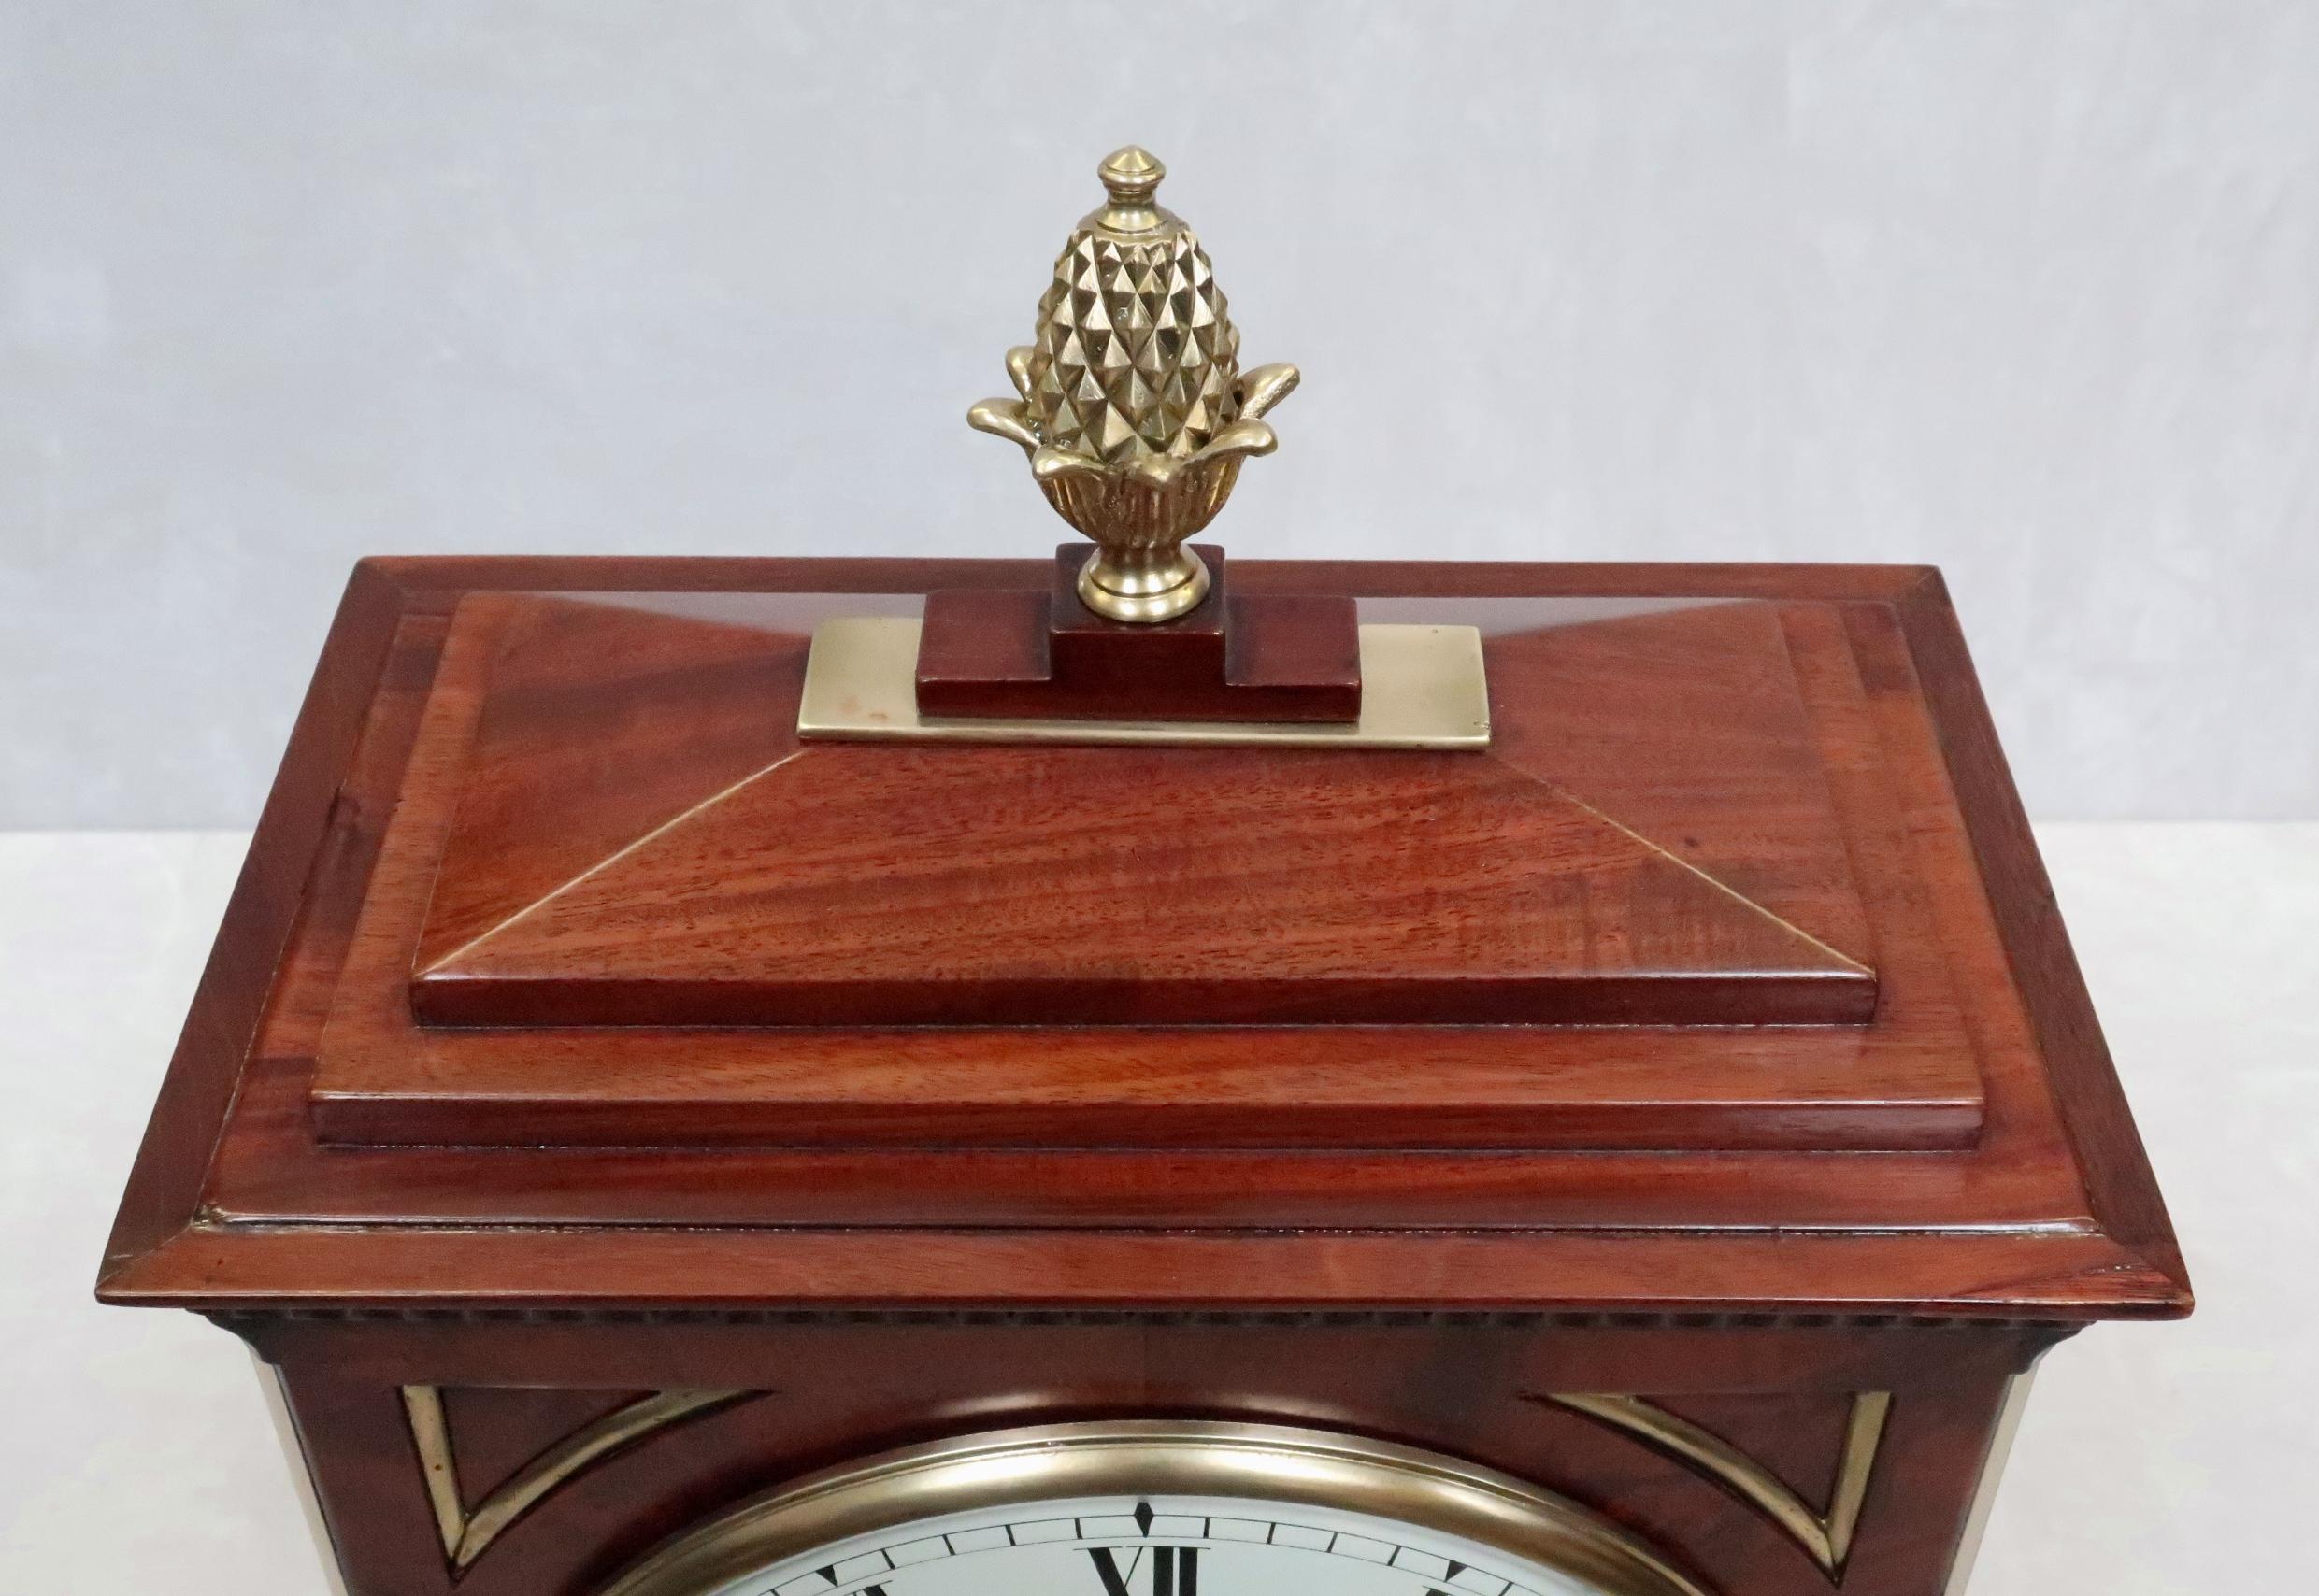 19th Century English George III Mahogany Bracket Clock by Hampson & Thelwell For Sale